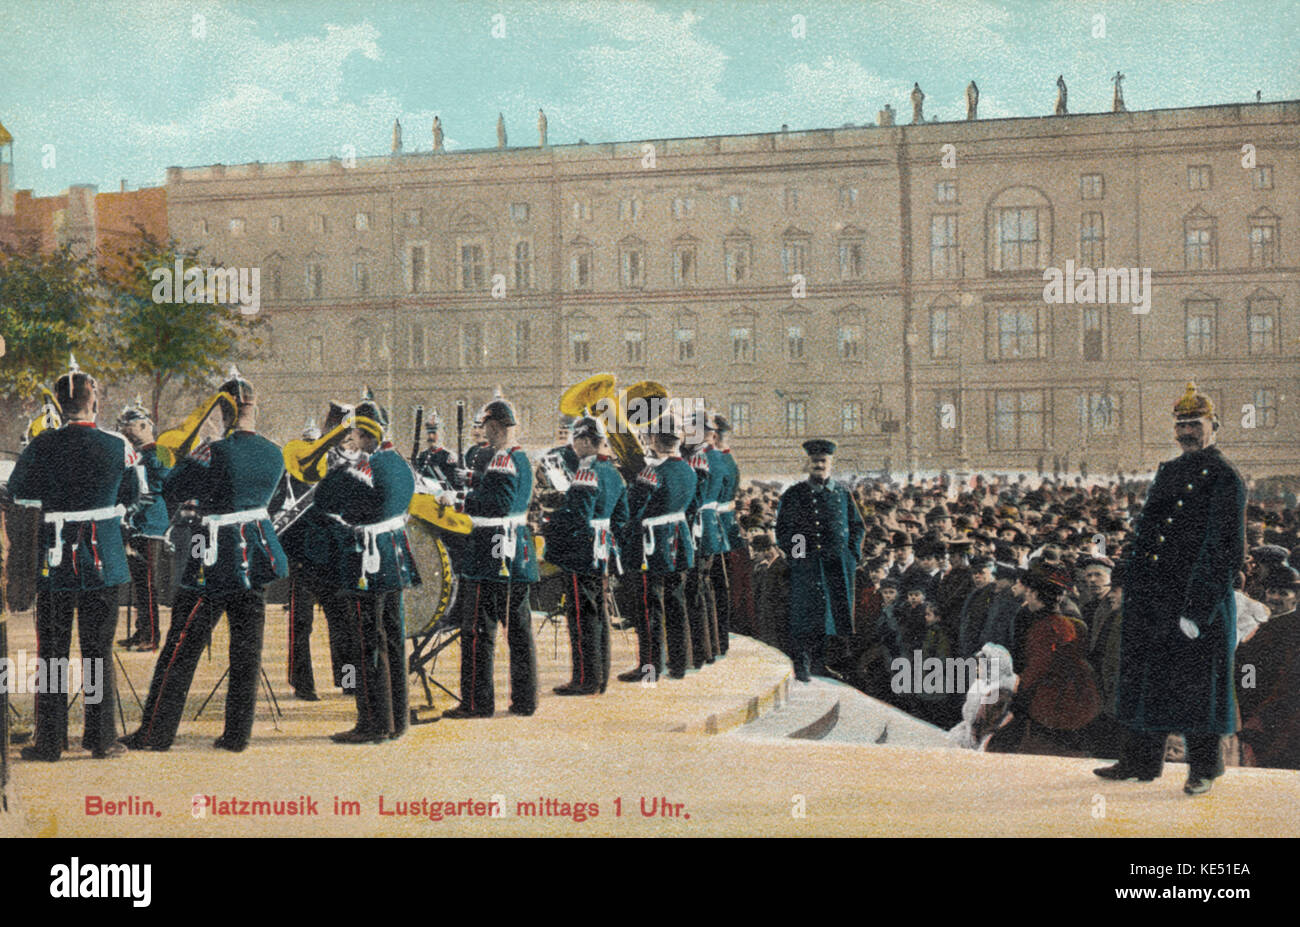 Military band in uniform playing outdoors. Early 20th century, Germany, Austro-Hungarian Empire Stock Photo